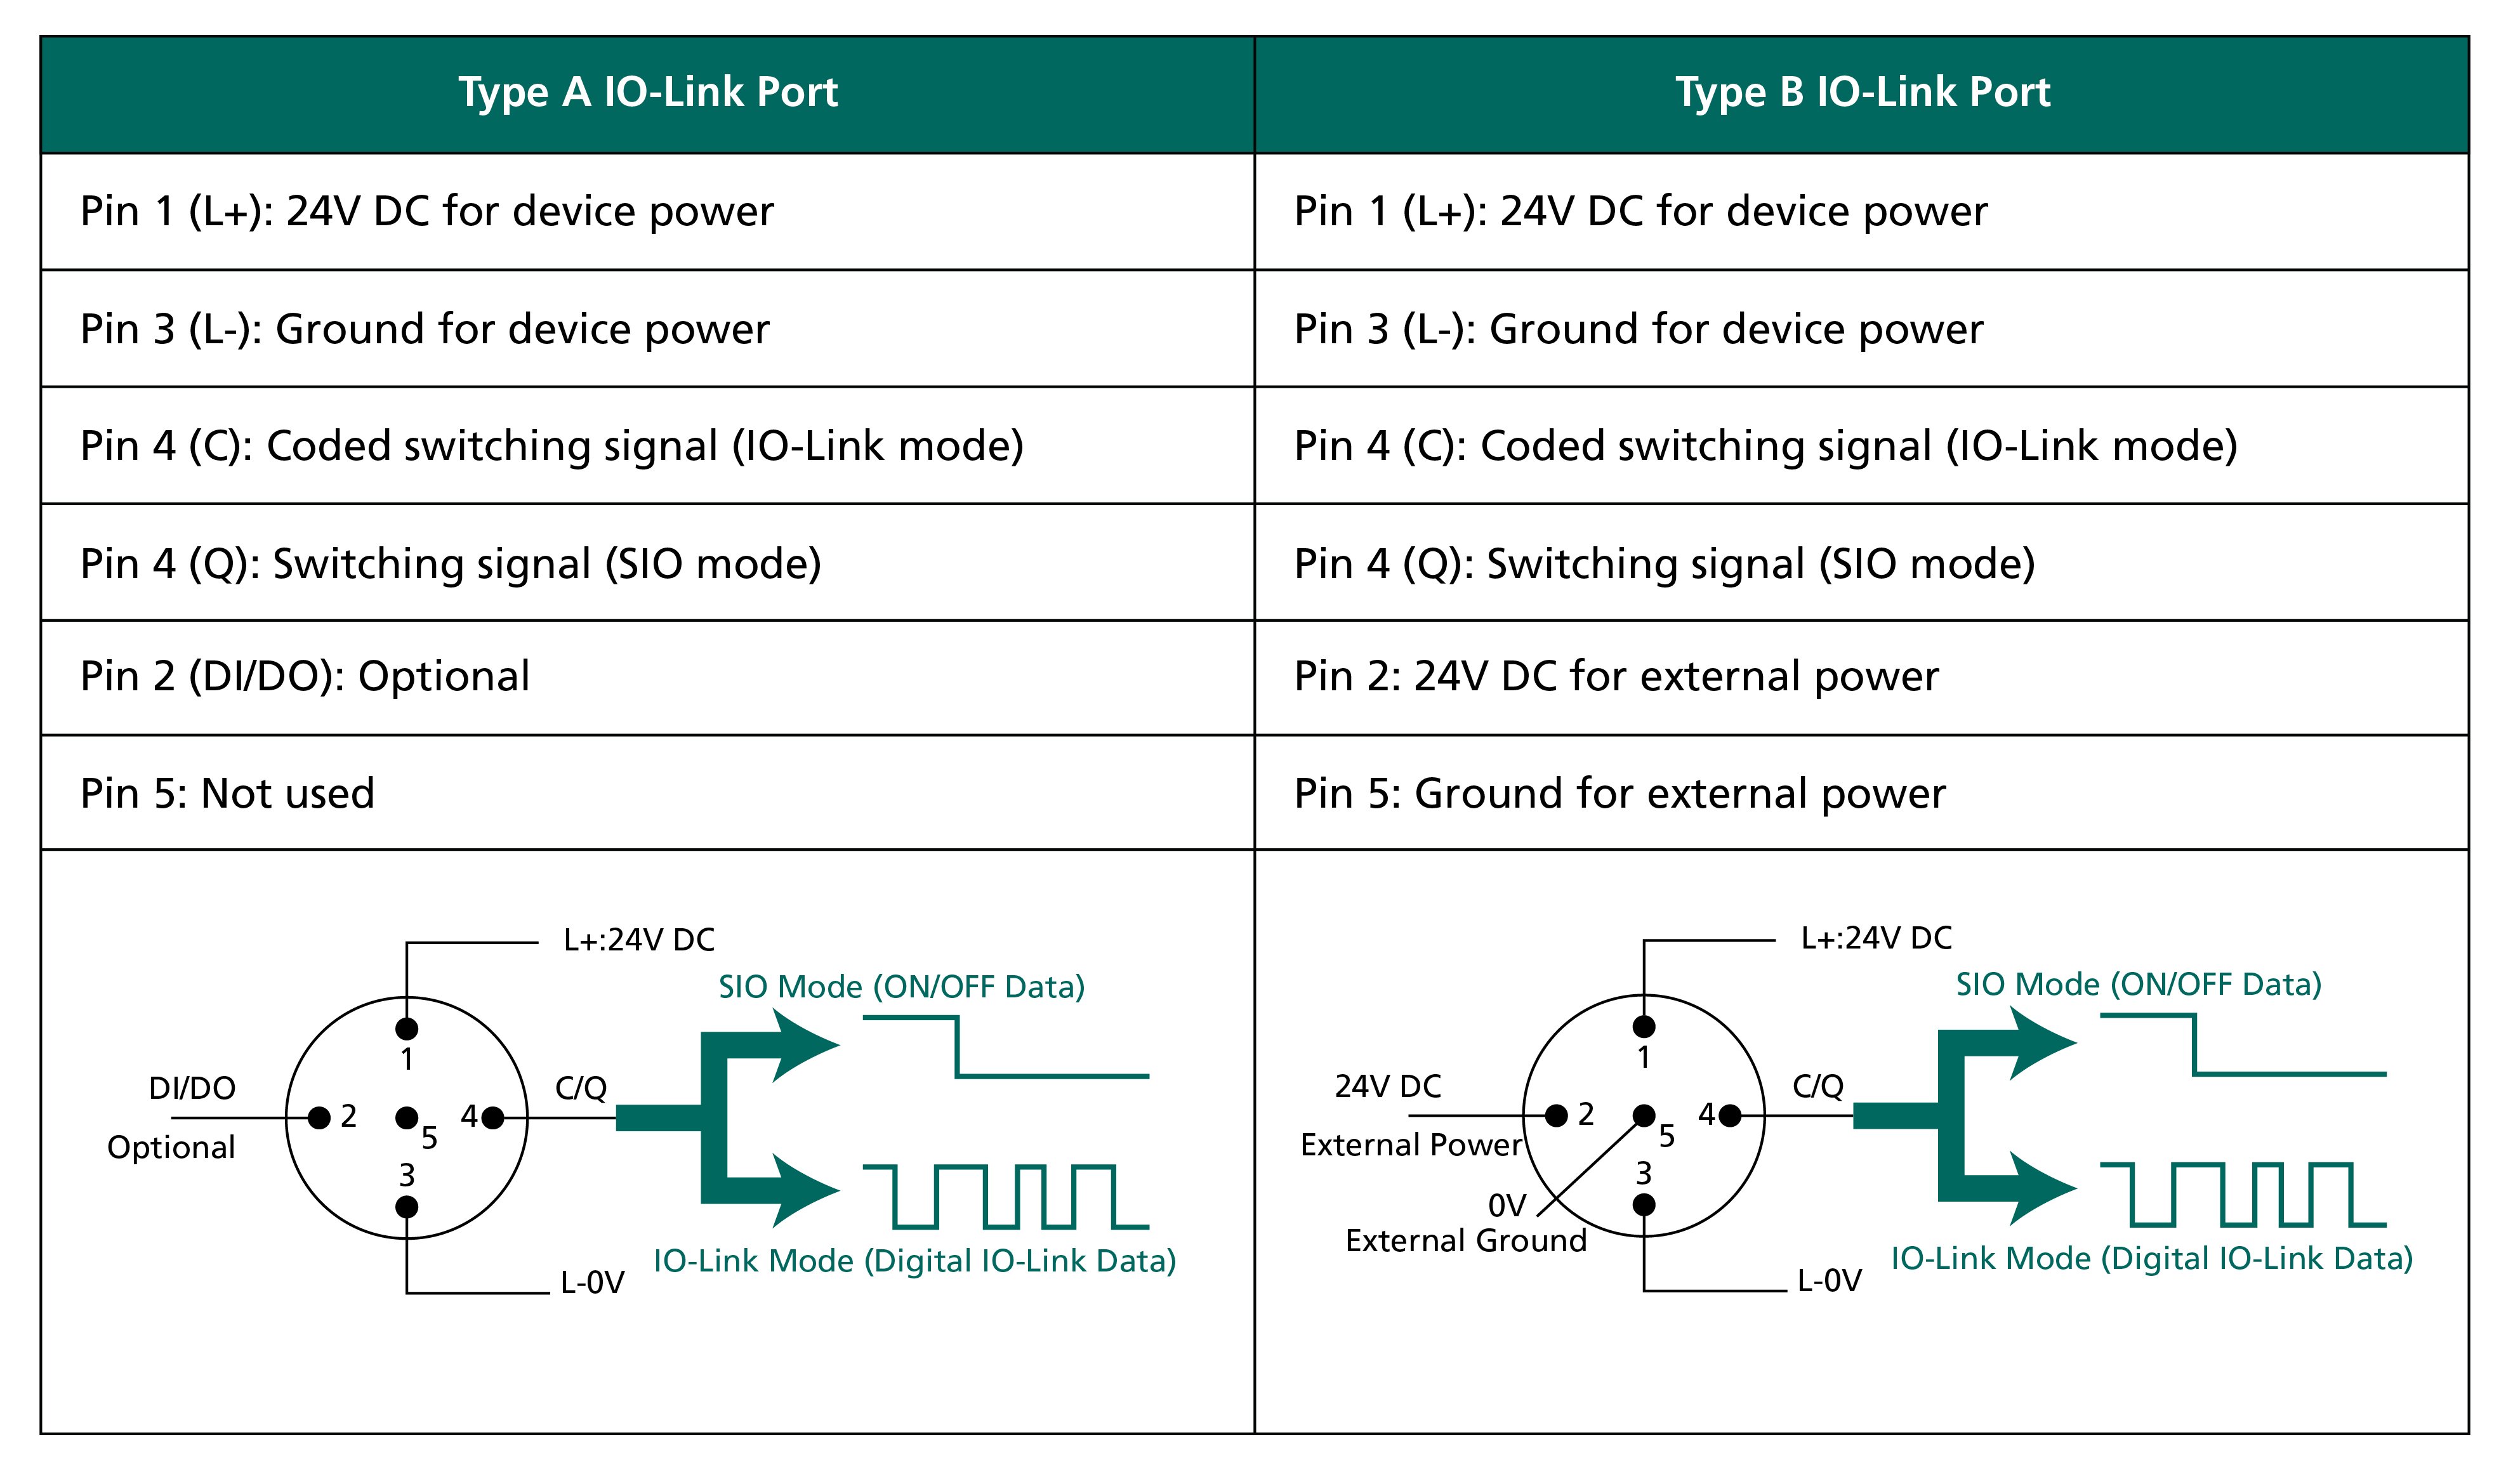 Figure 2. Type A and Type B IO-Link Ports